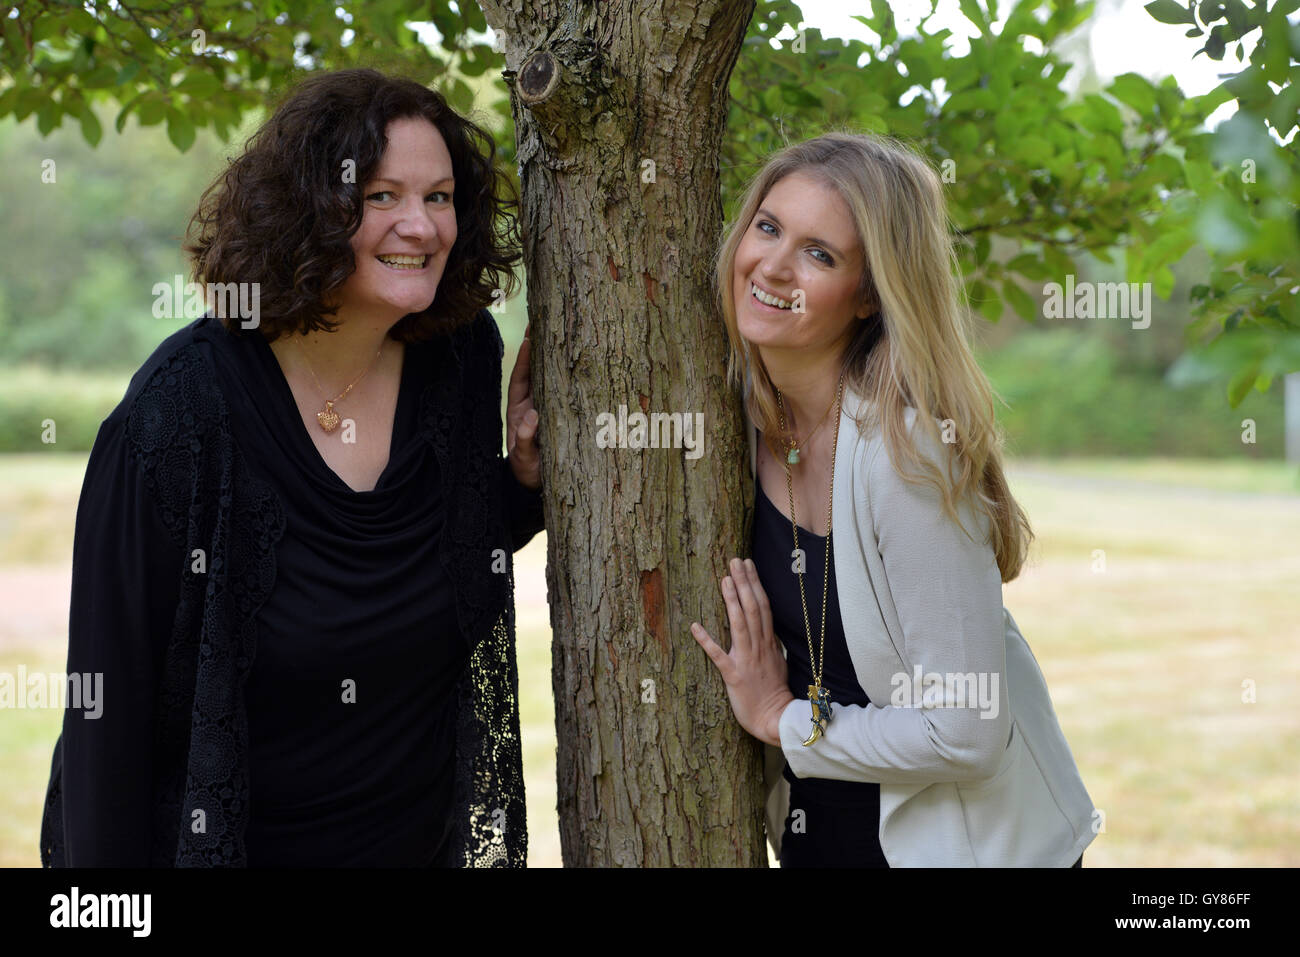 Birkenfeld, Germany. 17th Sep, 2016. Former model Felicity Gain (R) from London and Siobhan Kirsten Mansfield pose in a park in Birkenfeld, Germany, 17 September 2016. In 2002, 44-year-old Mansfield from Trassem, Germany donated bone marrow for Felicity Gain, now 38, which saved her life. Phoot: HARALD TITTEL/dpa/Alamy Live News Stock Photo